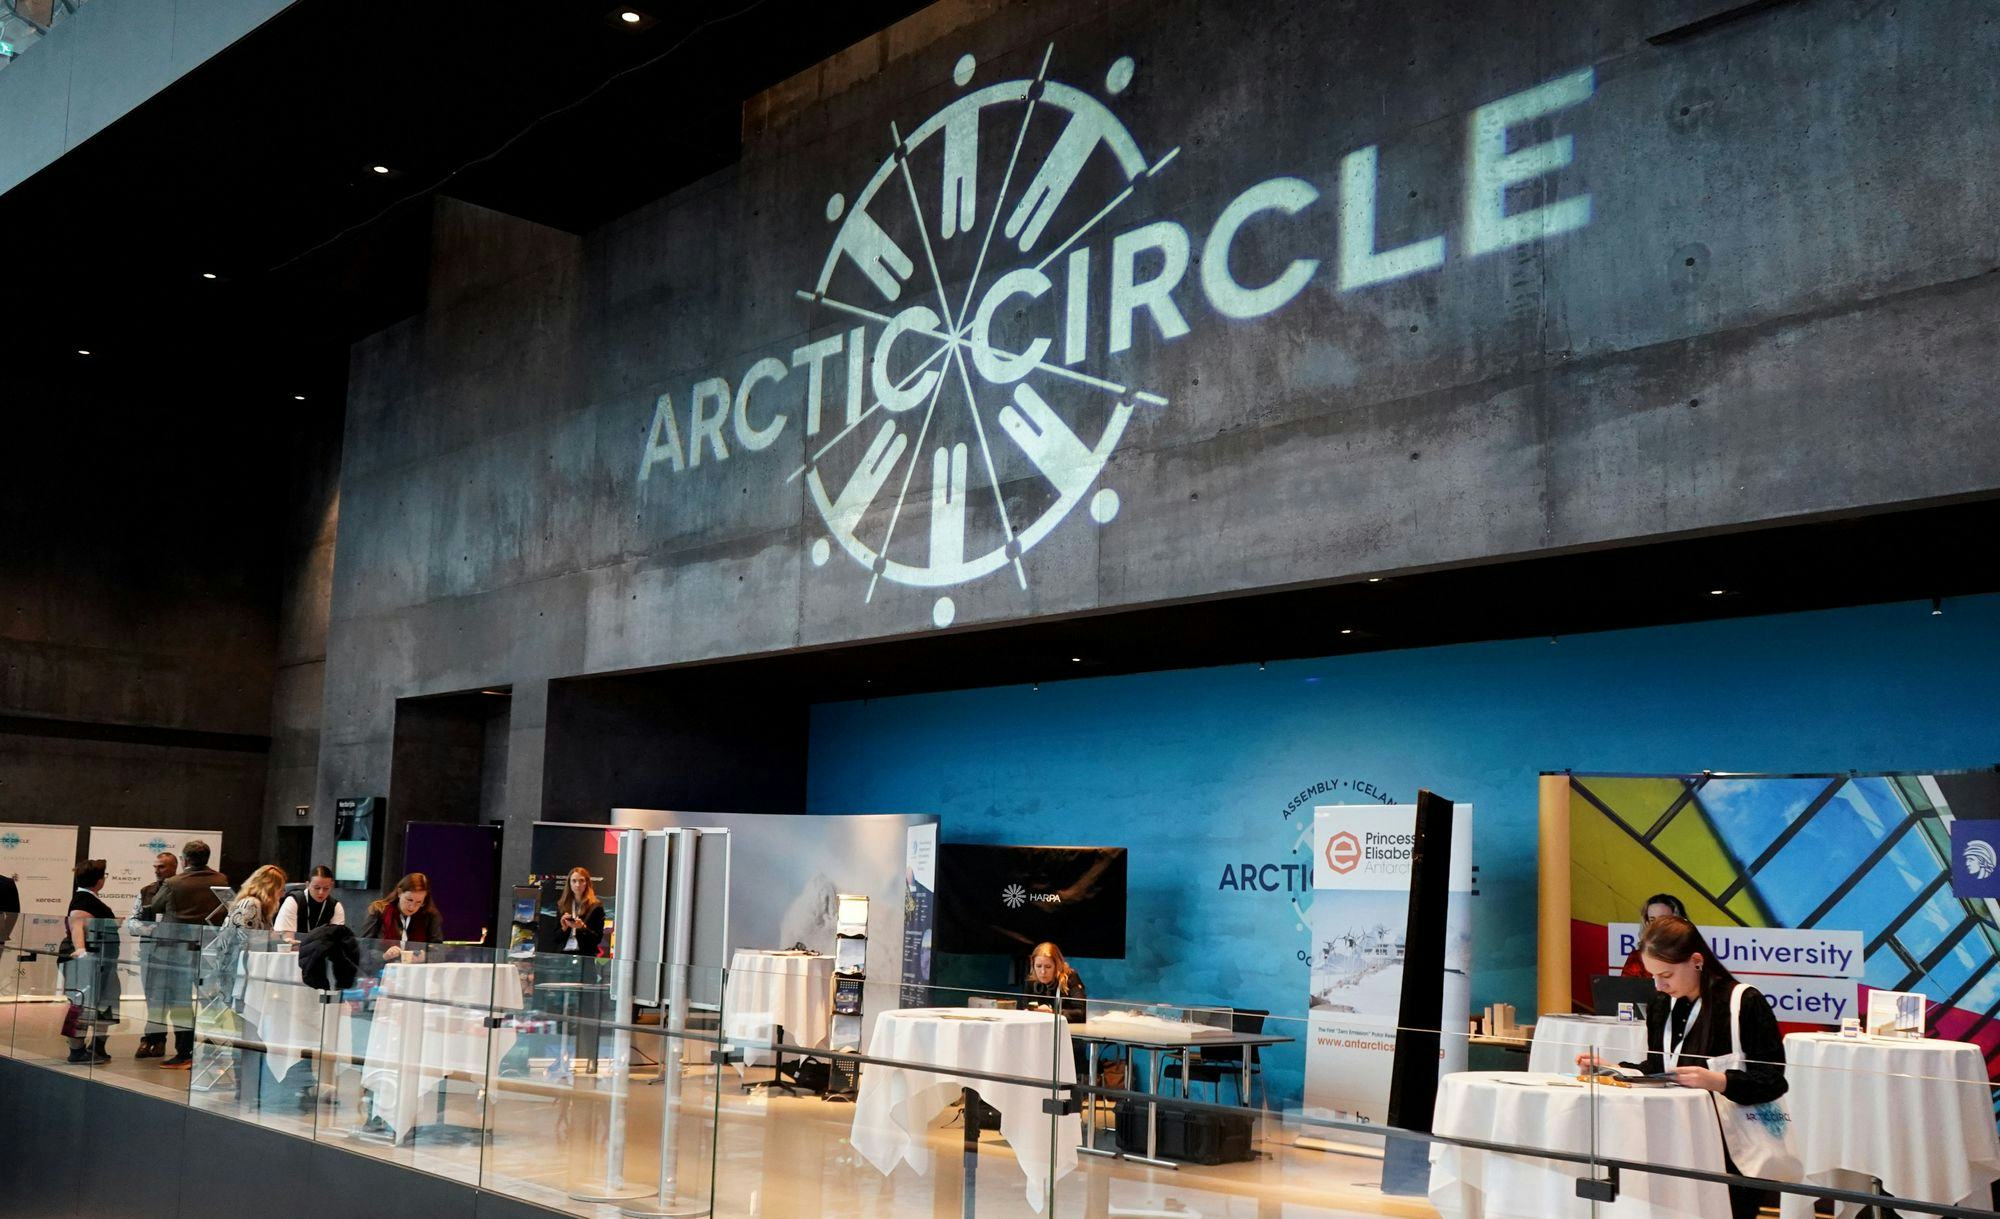 A registration or information area with white cloth covered tables set against a large wall with "ARCTIC CIRCLE" logo displayed